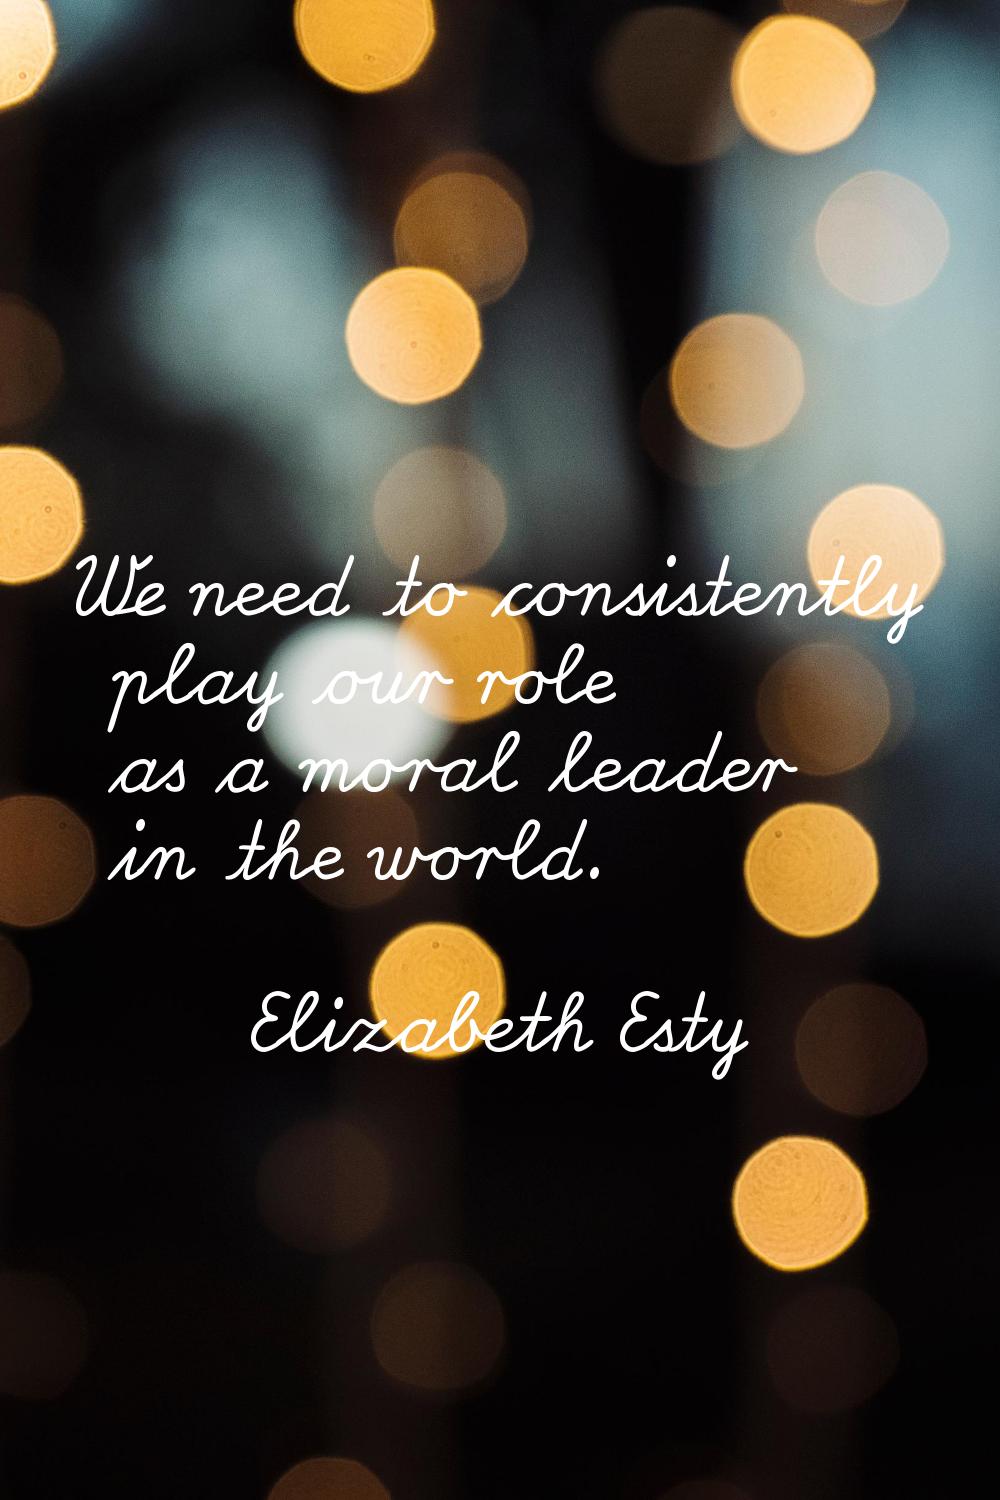 We need to consistently play our role as a moral leader in the world.